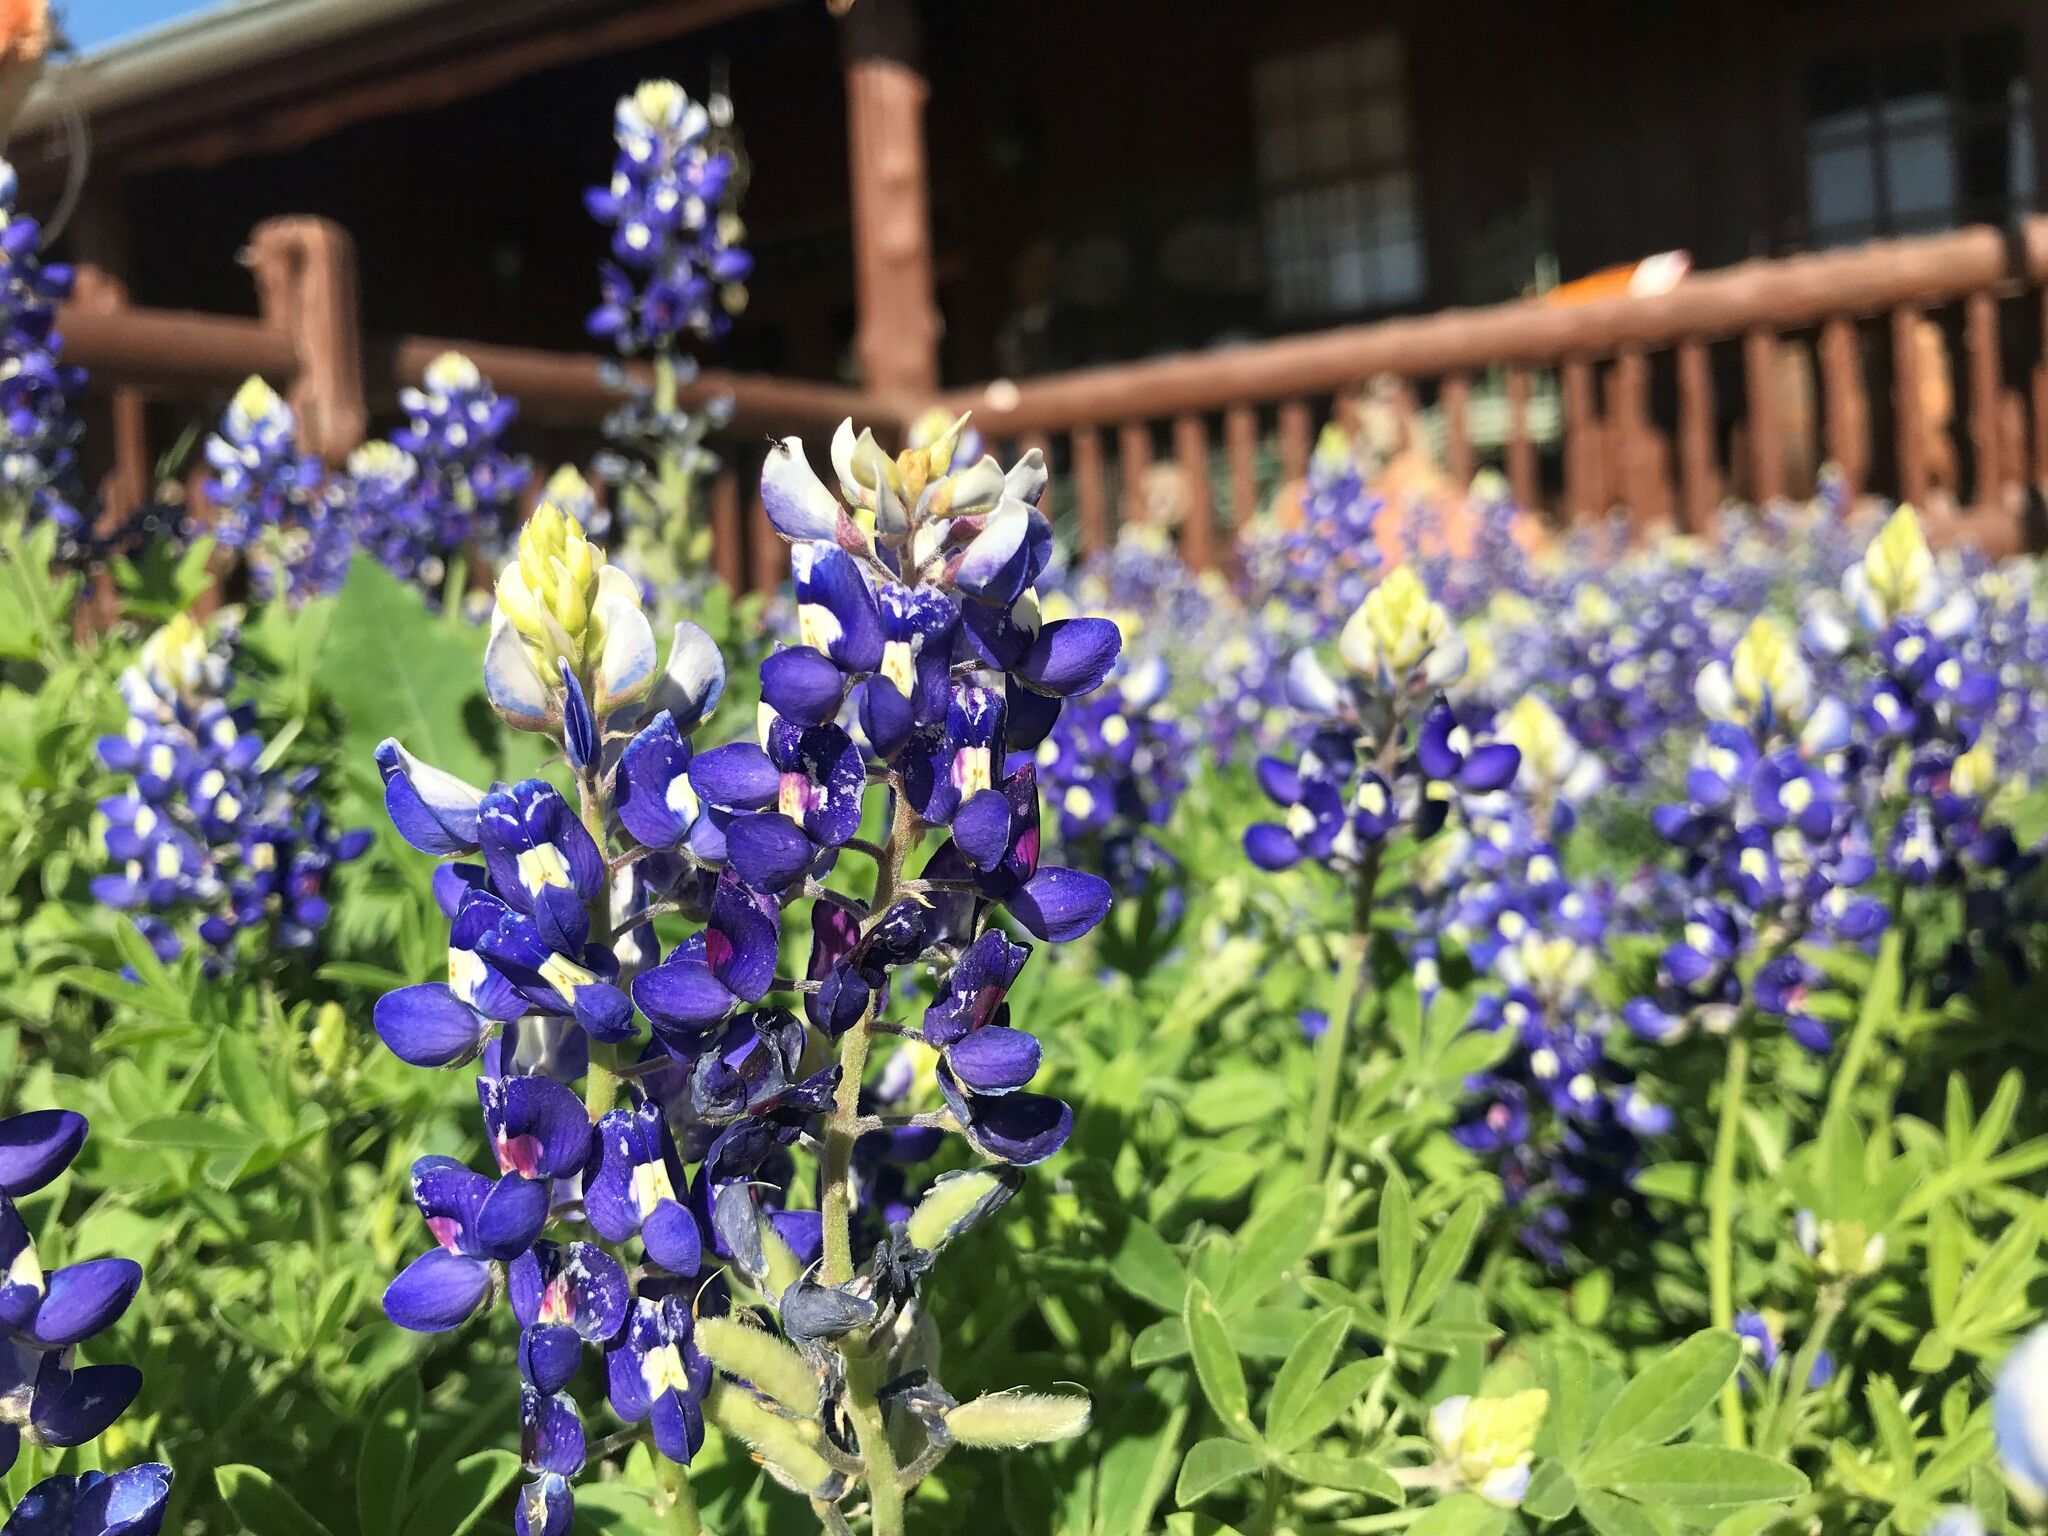 Head west to Fredericksburg's Wildseed Farms, the nation's largest wildflower farm